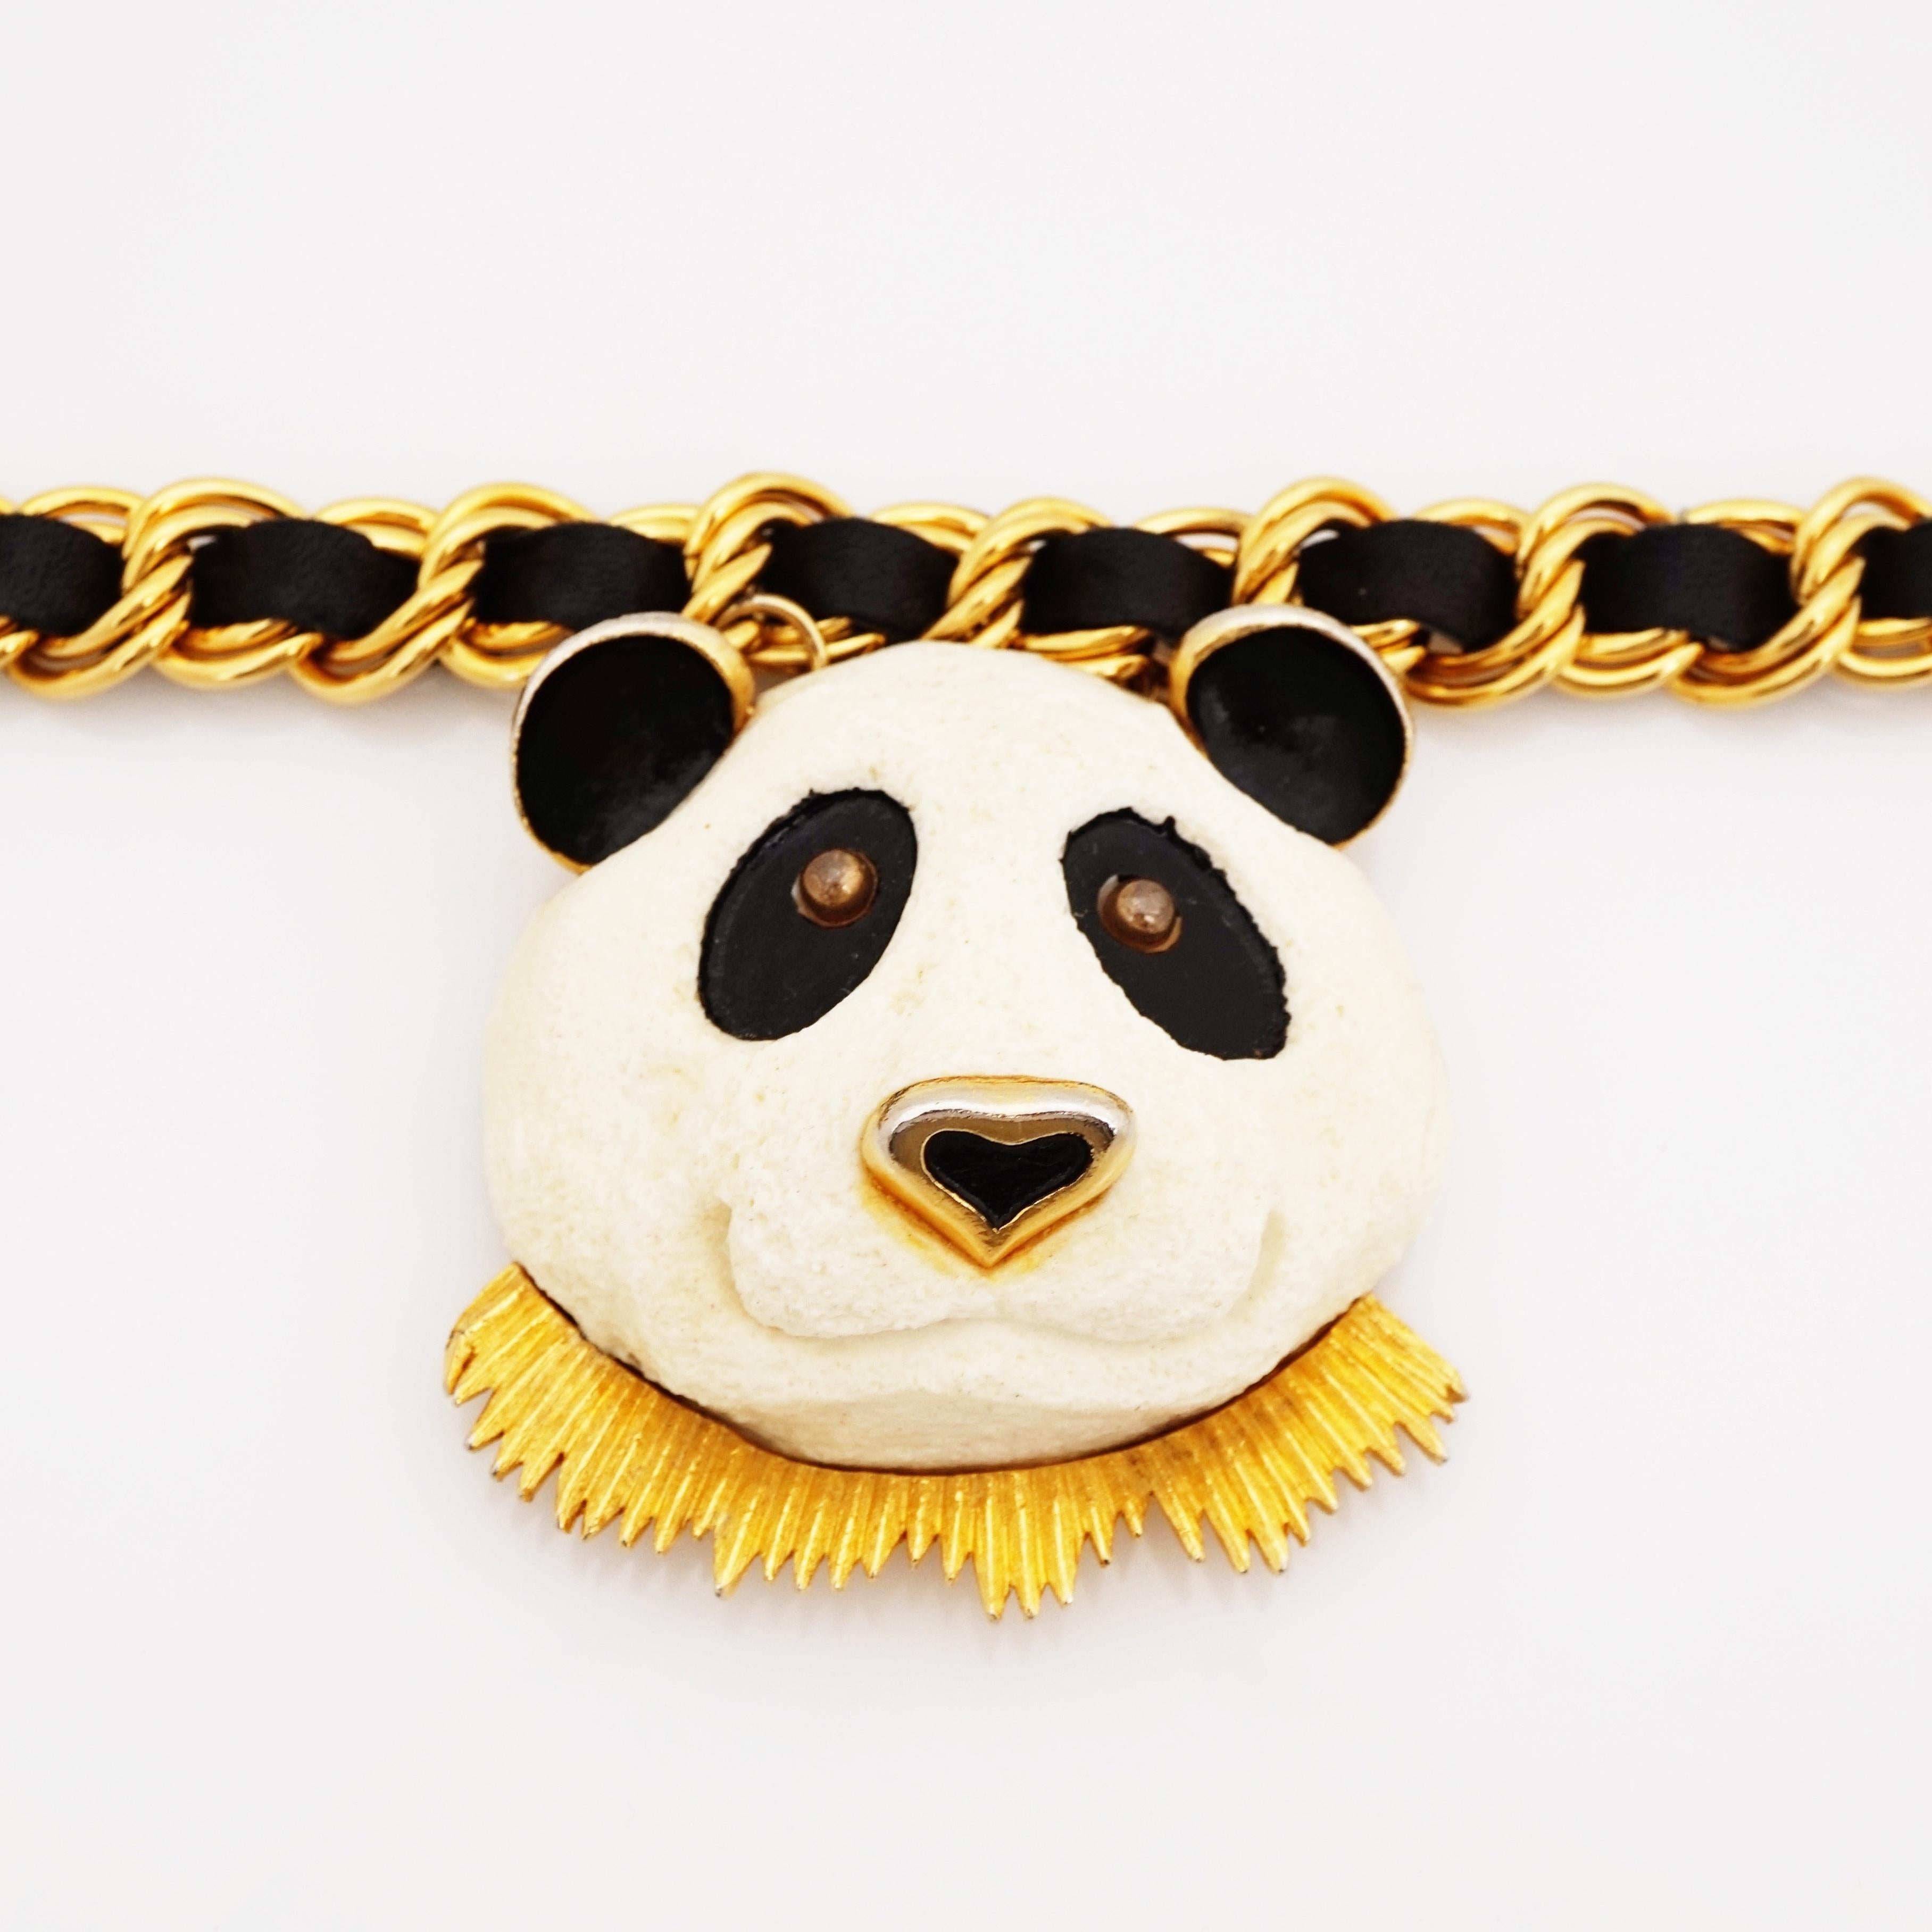 70s Panda Face Pendant Statement Necklace w Woven Black Leather Chain By RAZZA In Good Condition For Sale In McKinney, TX